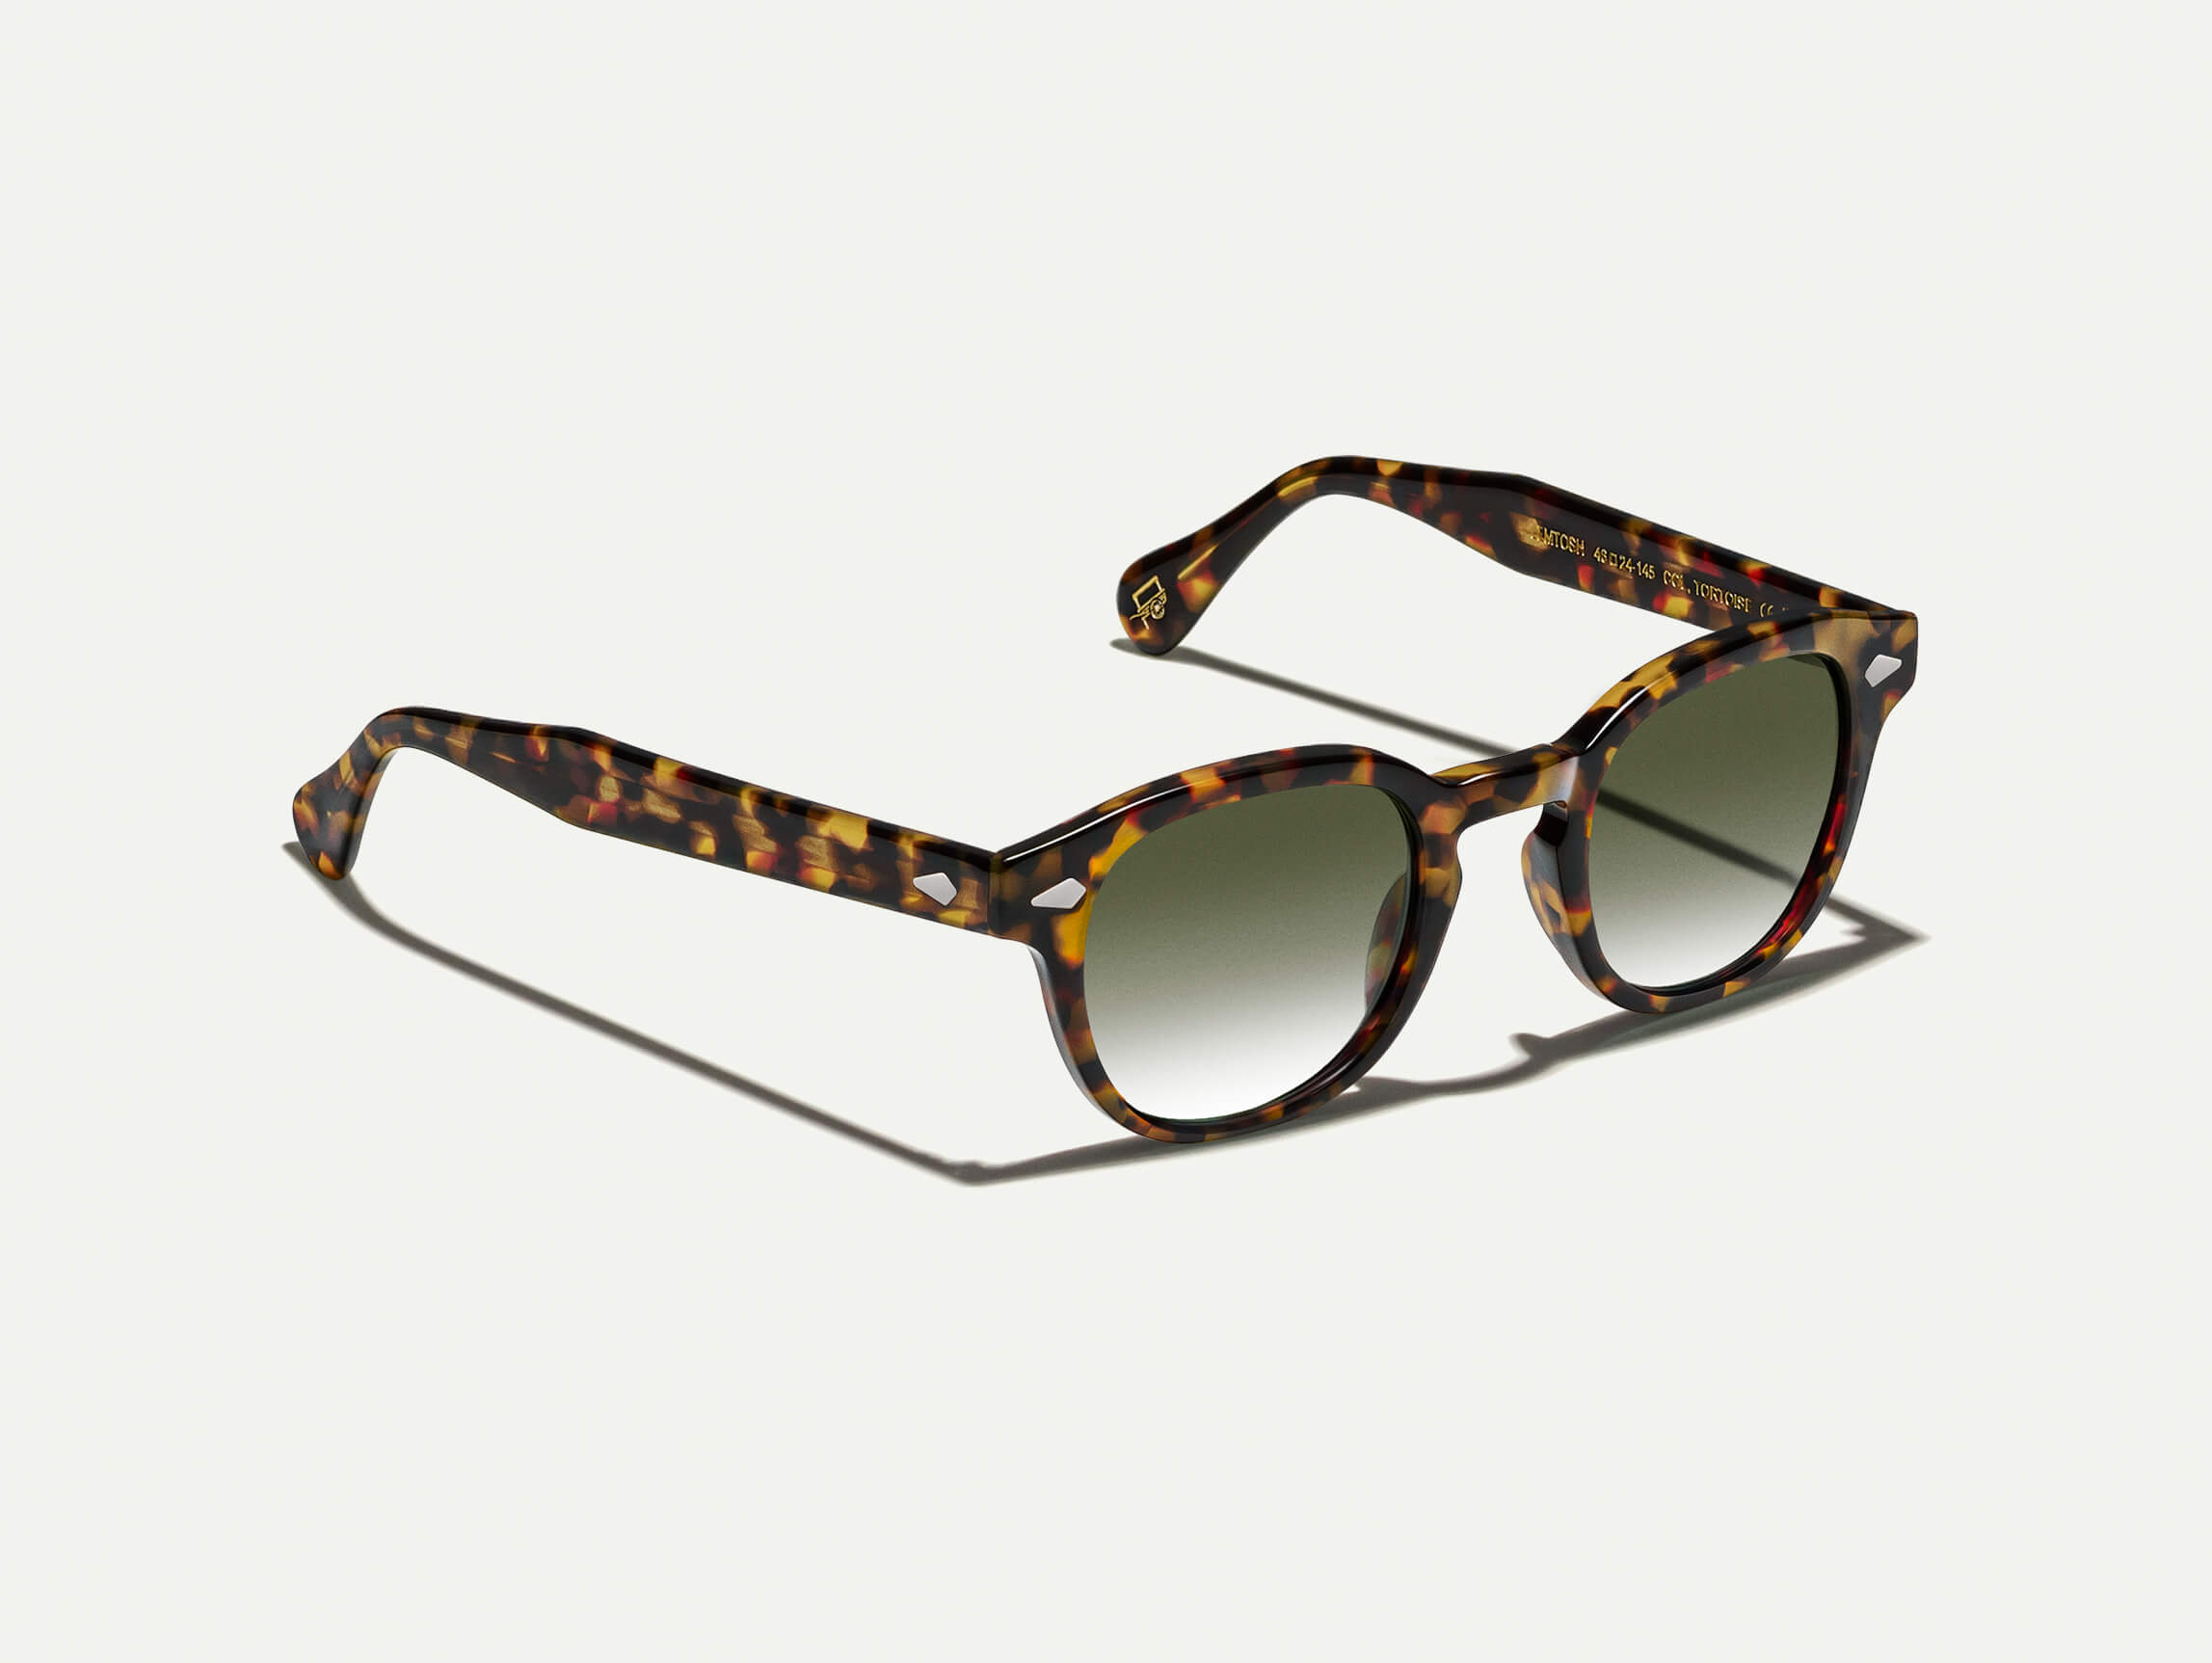 The LEMTOSH Tortoise with G-15 Fade Tinted Lenses